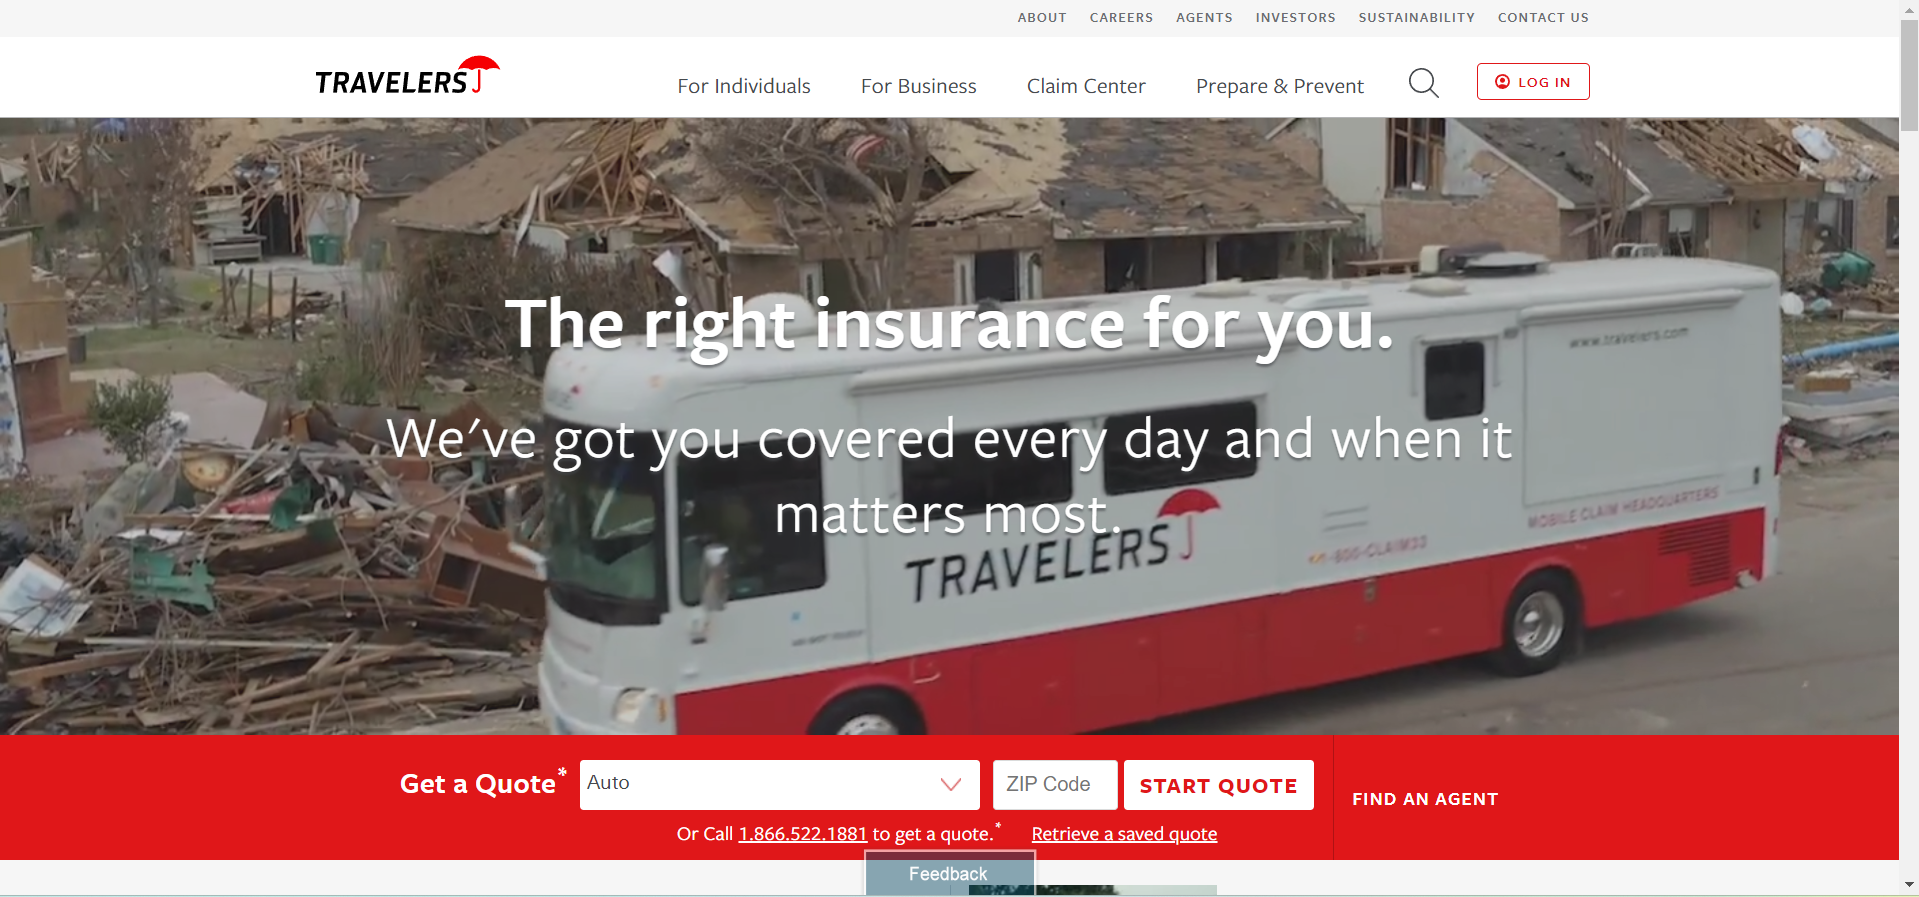 Travelers: Best Business Insurance for Insurance Agents